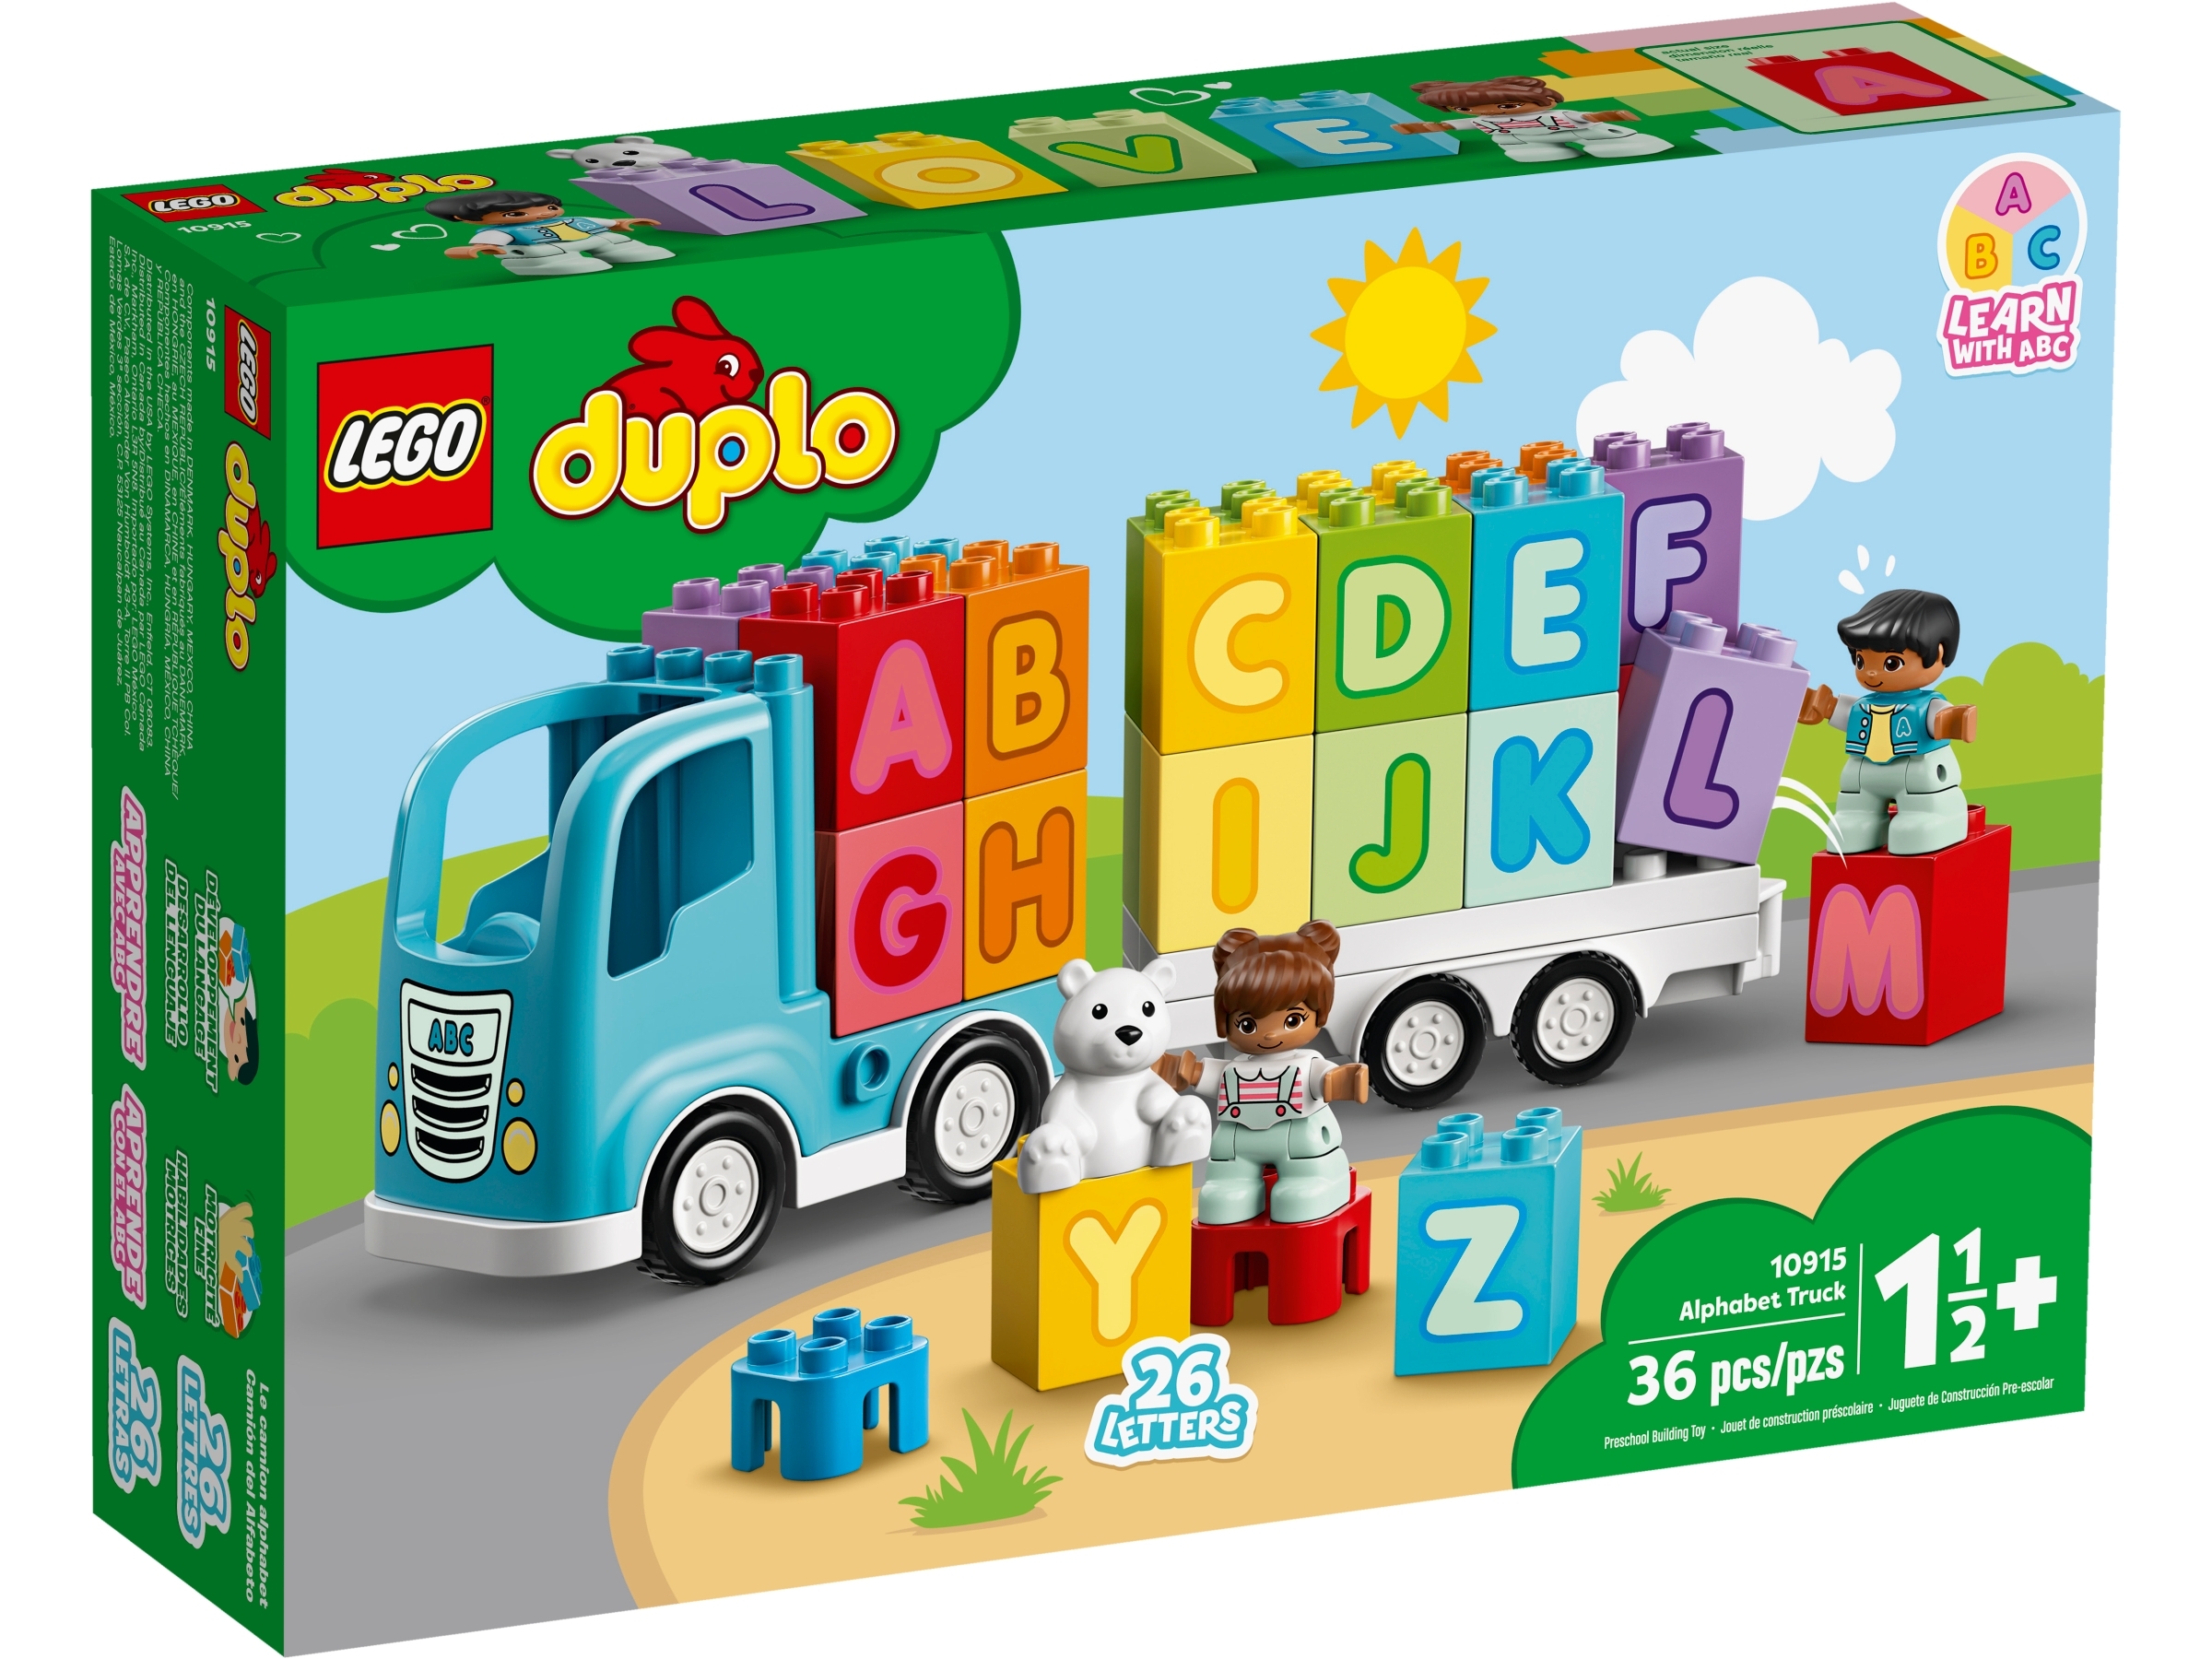 LEGO DUPLO My First Alphabet Truck Toy Learning Letter Bricks Figures Colourful 